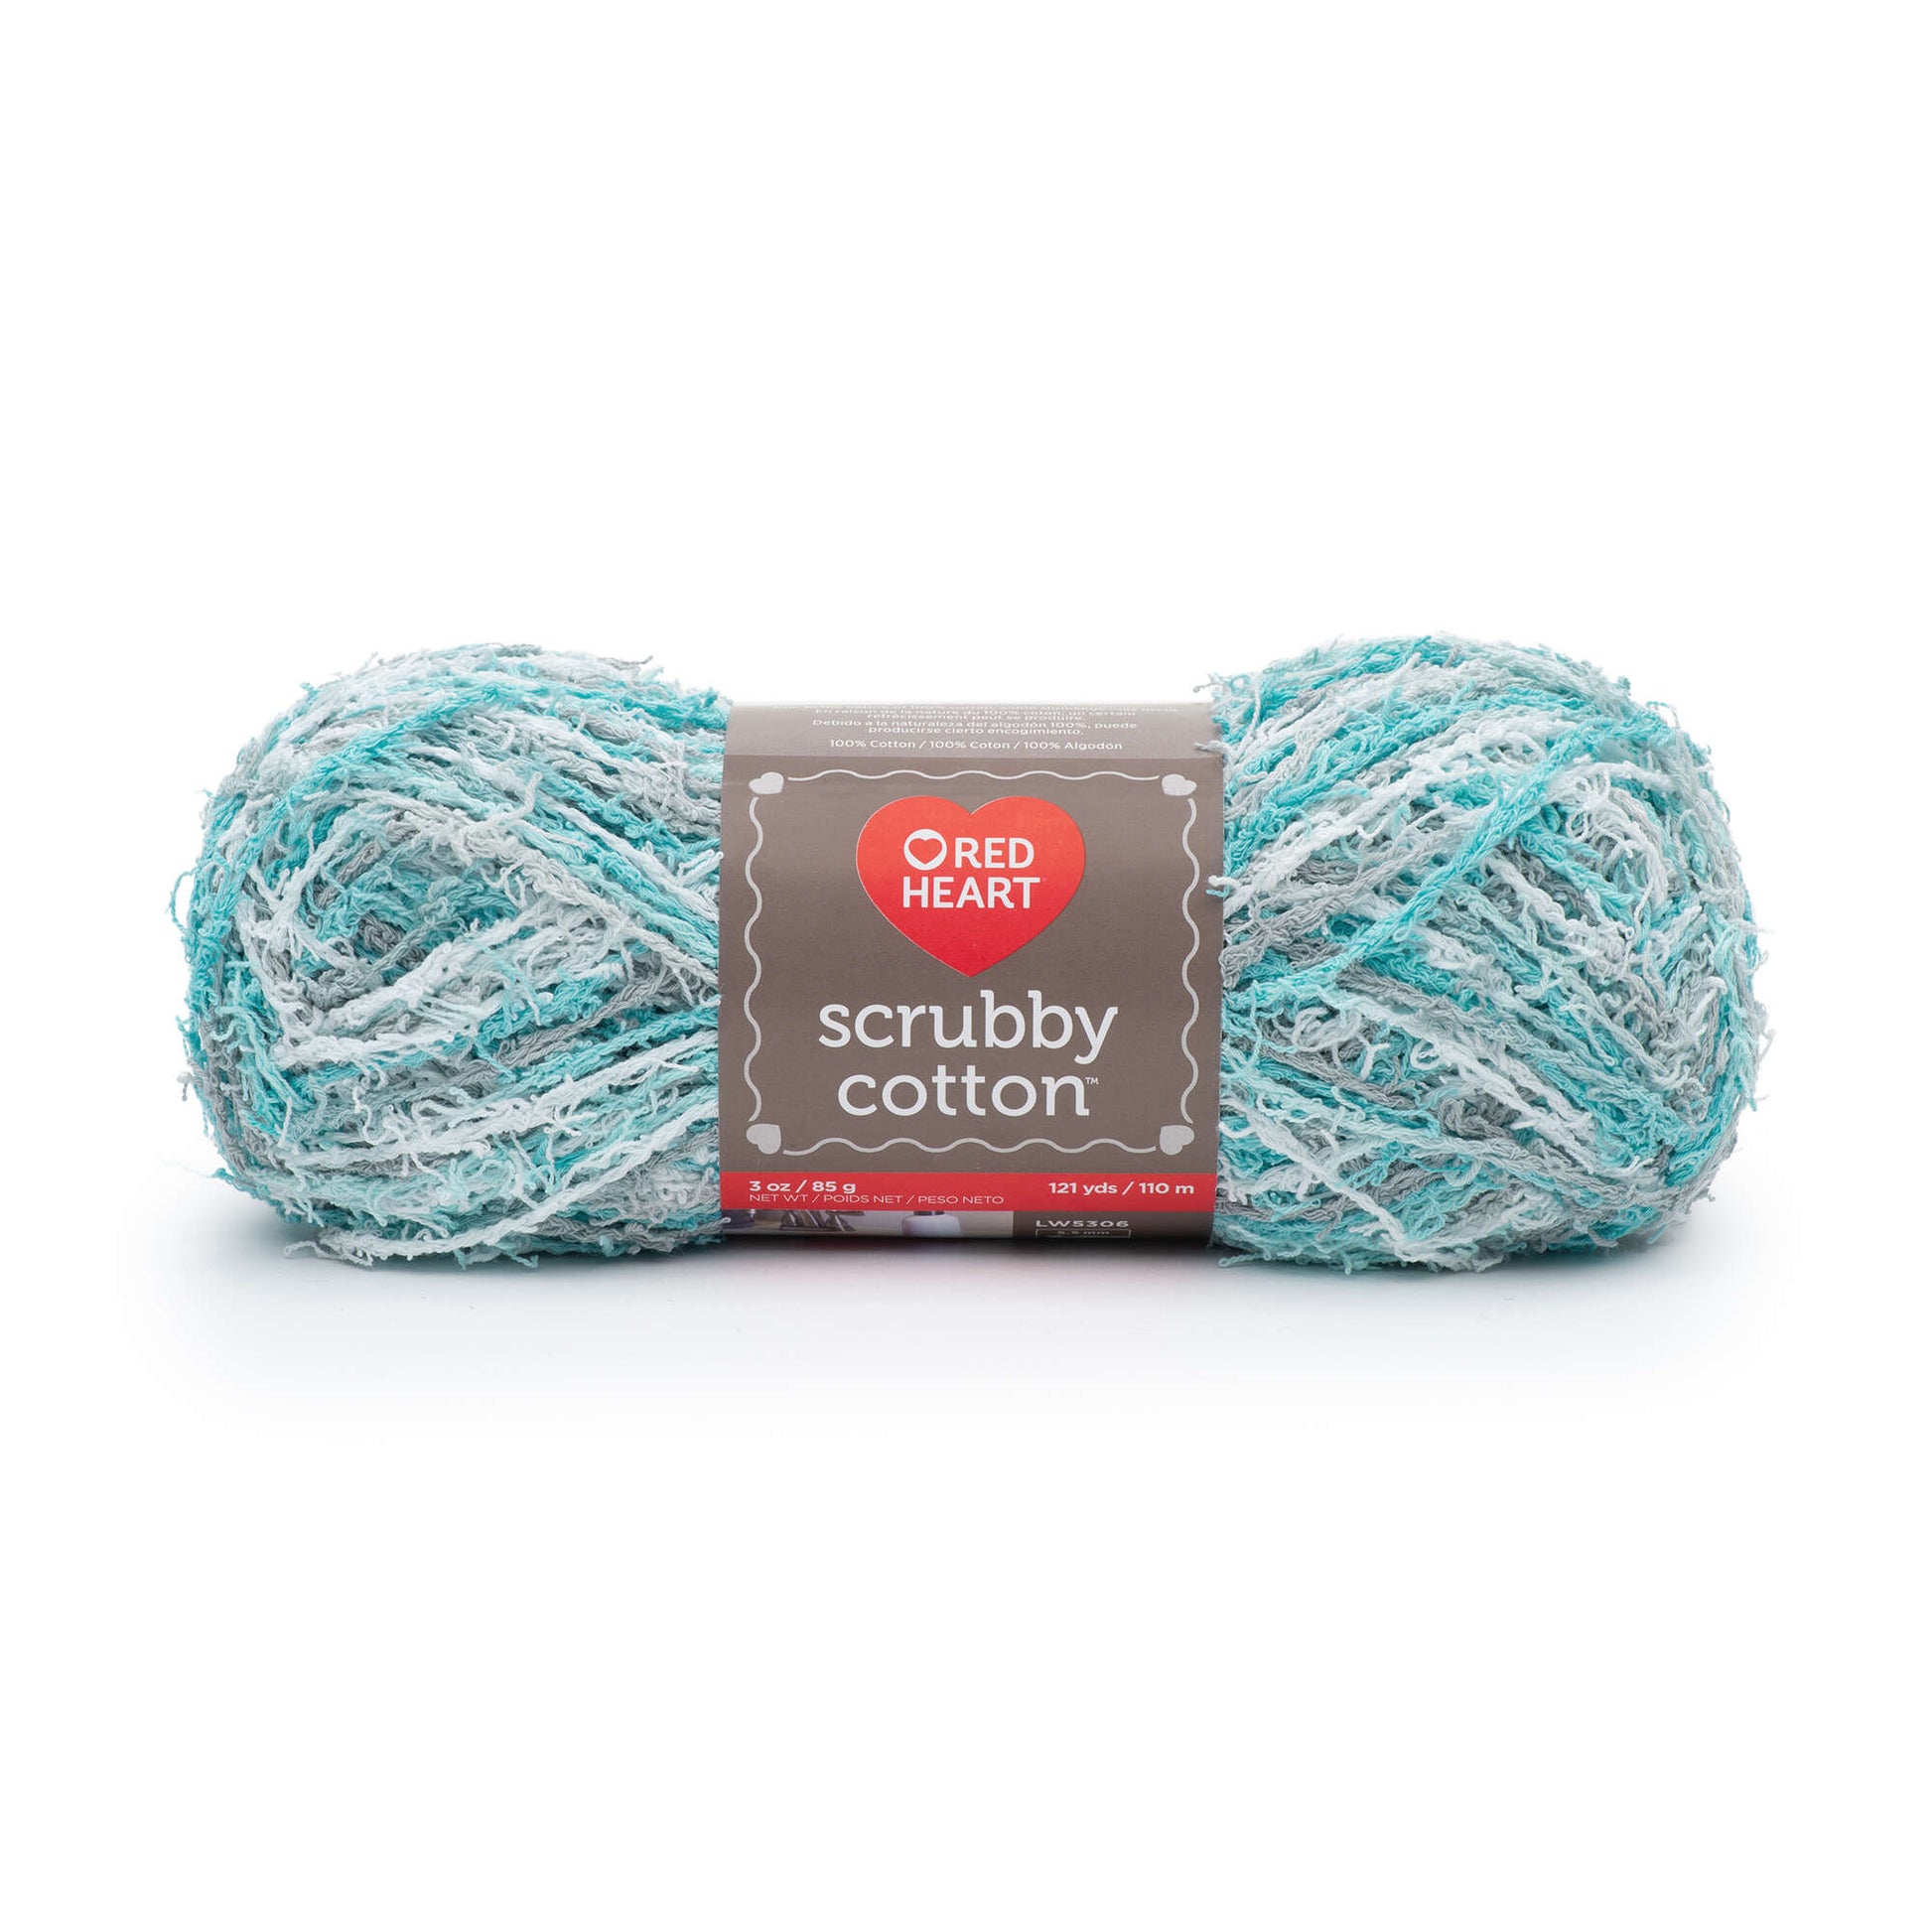 Red Heart Scrubby Cotton Yarn - Discontinued shades Refreshing